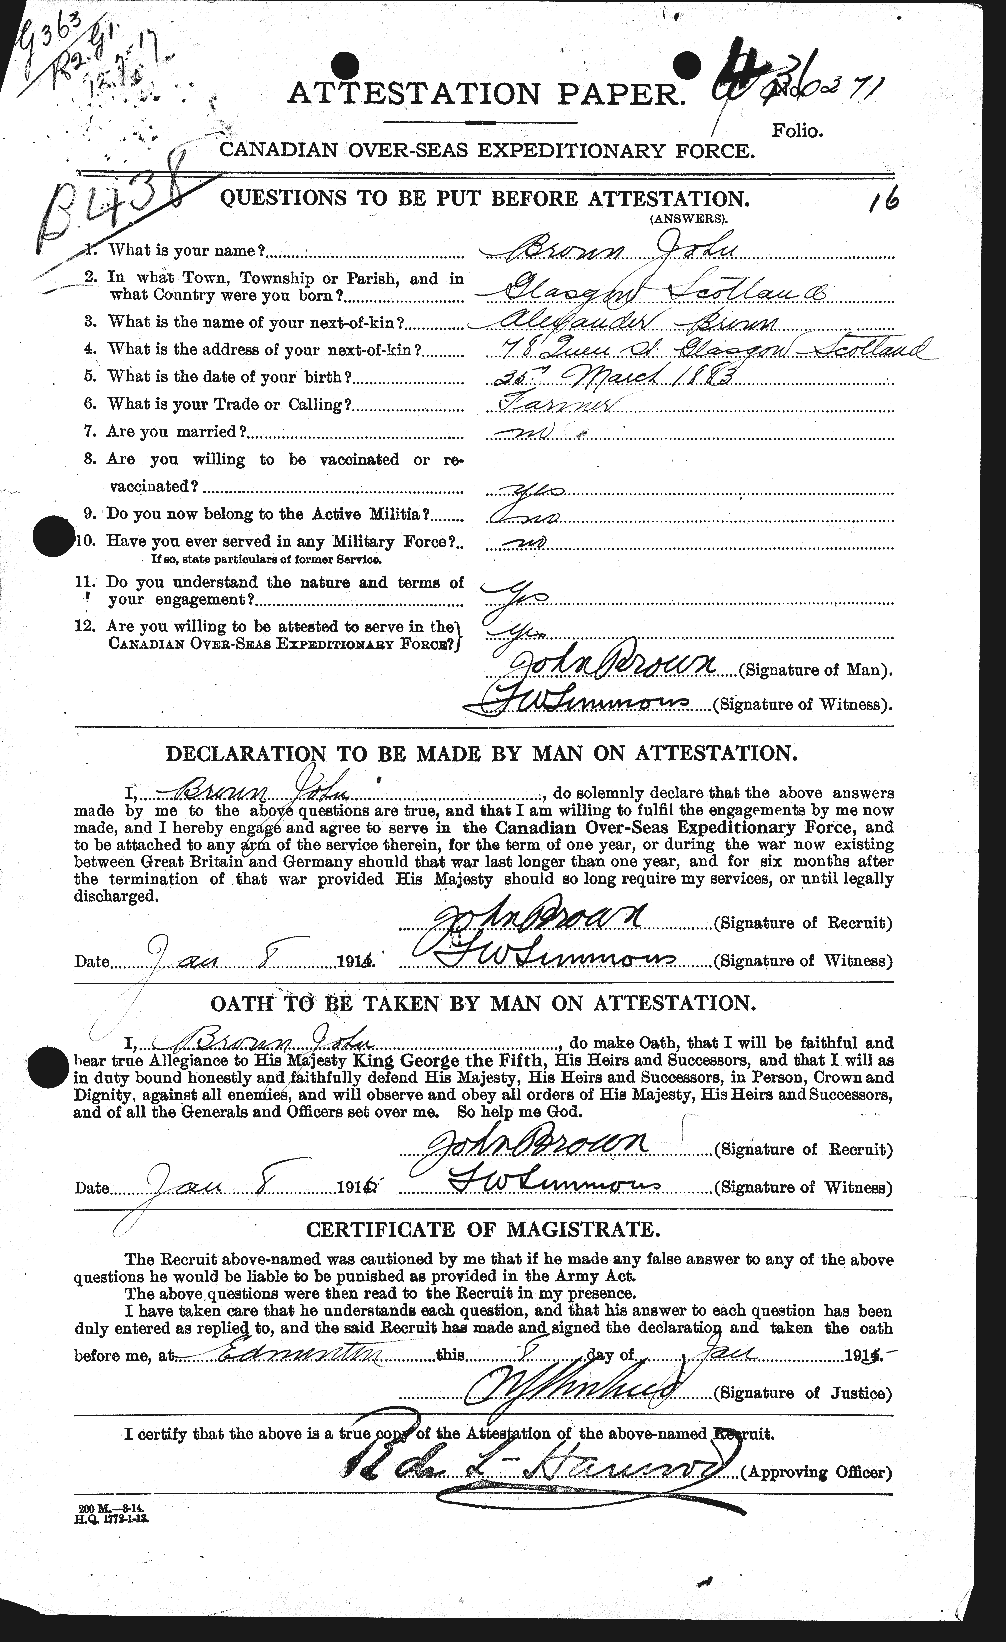 Personnel Records of the First World War - CEF 263883a